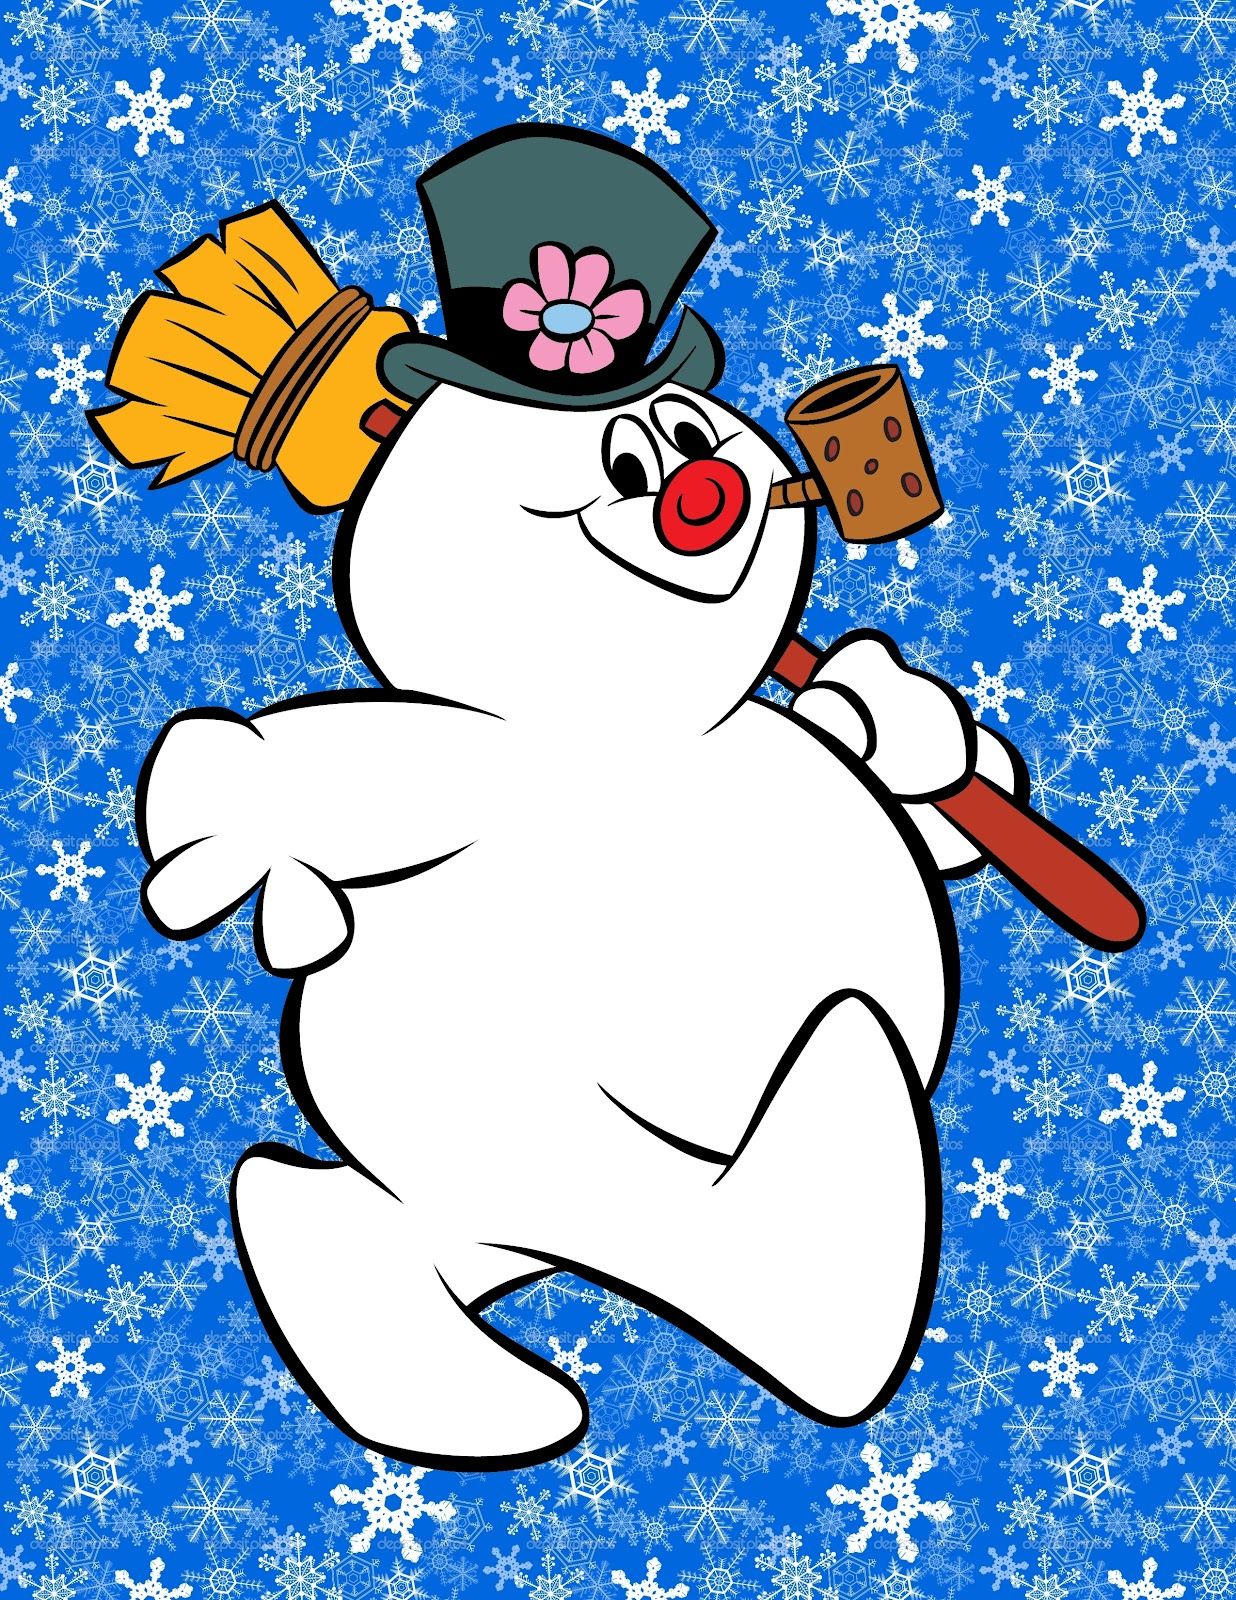 Frosty The Snowman <3 I looked forward for this classic on tv every ...